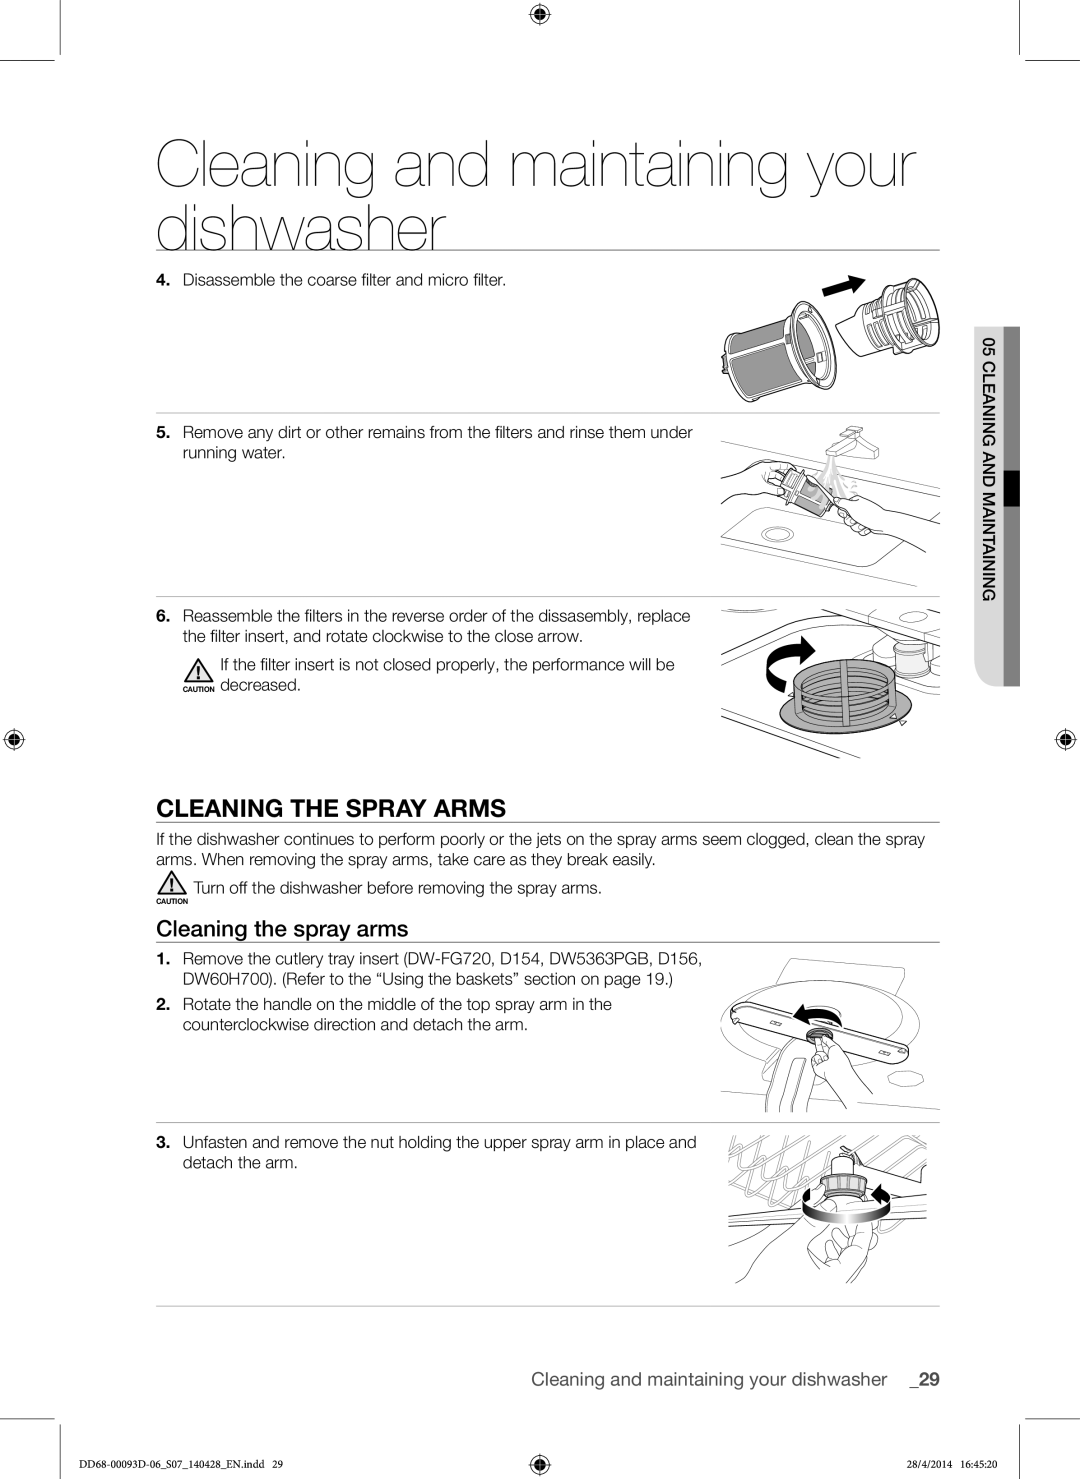 Samsung DW-FG520S/XTR manual Cleaning The Spray Arms, Cleaning the spray arms, Cleaning and maintaining your dishwasher 